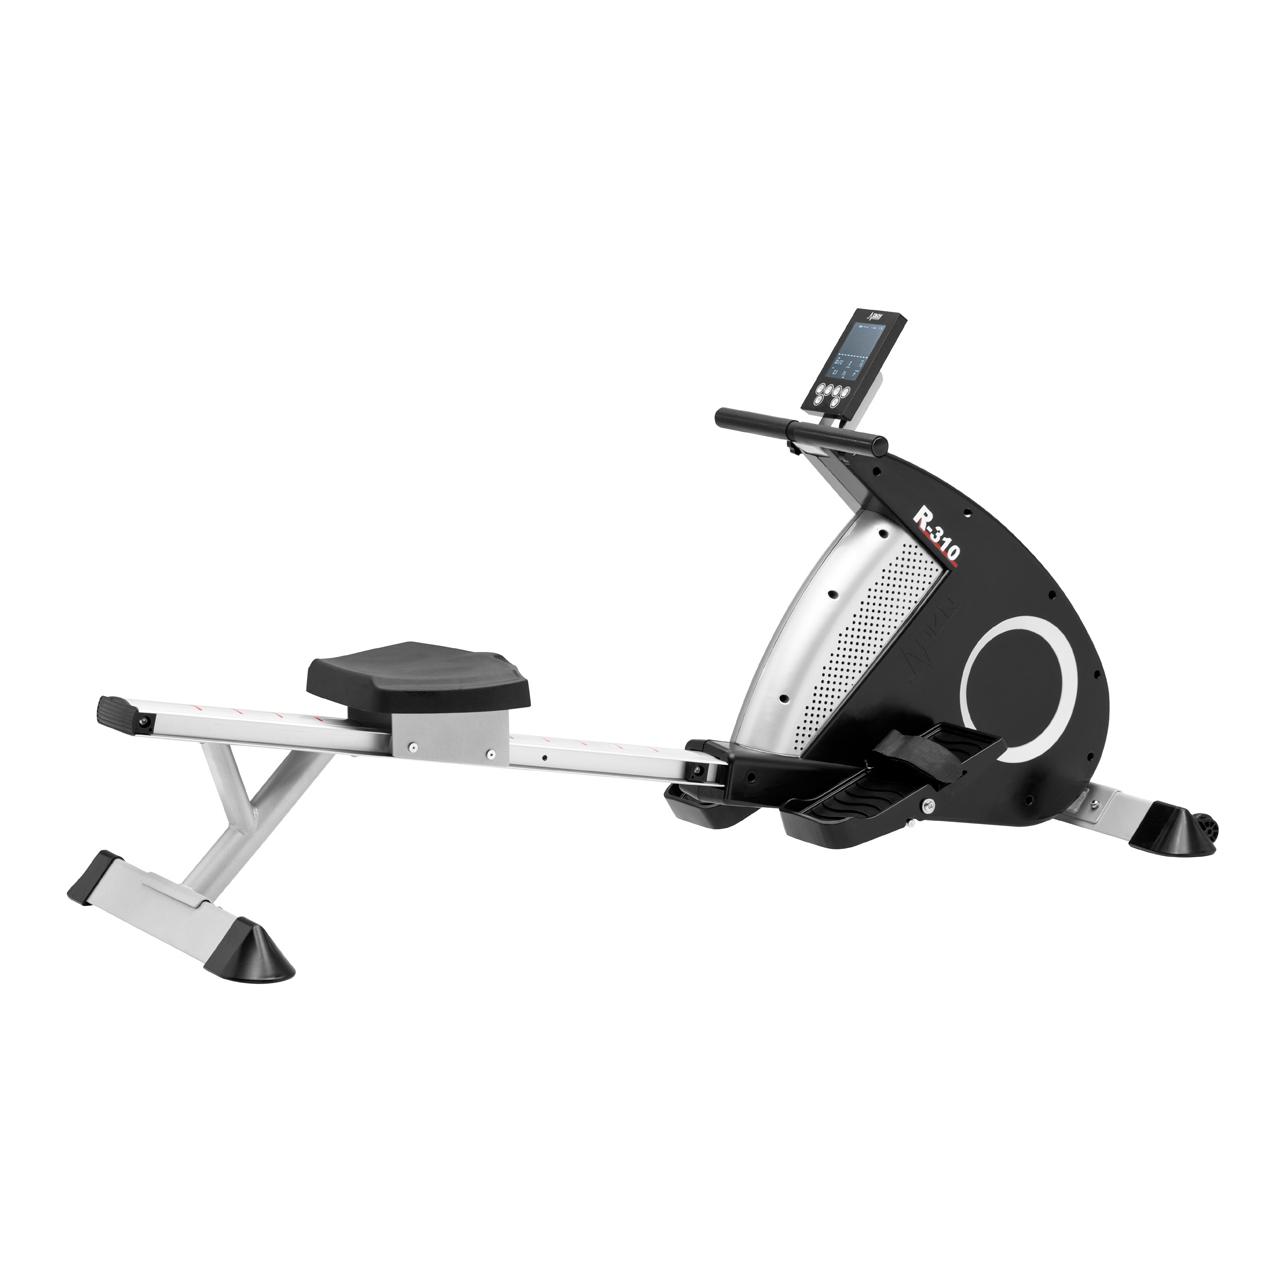 Foto Remo DKN Rower R-310